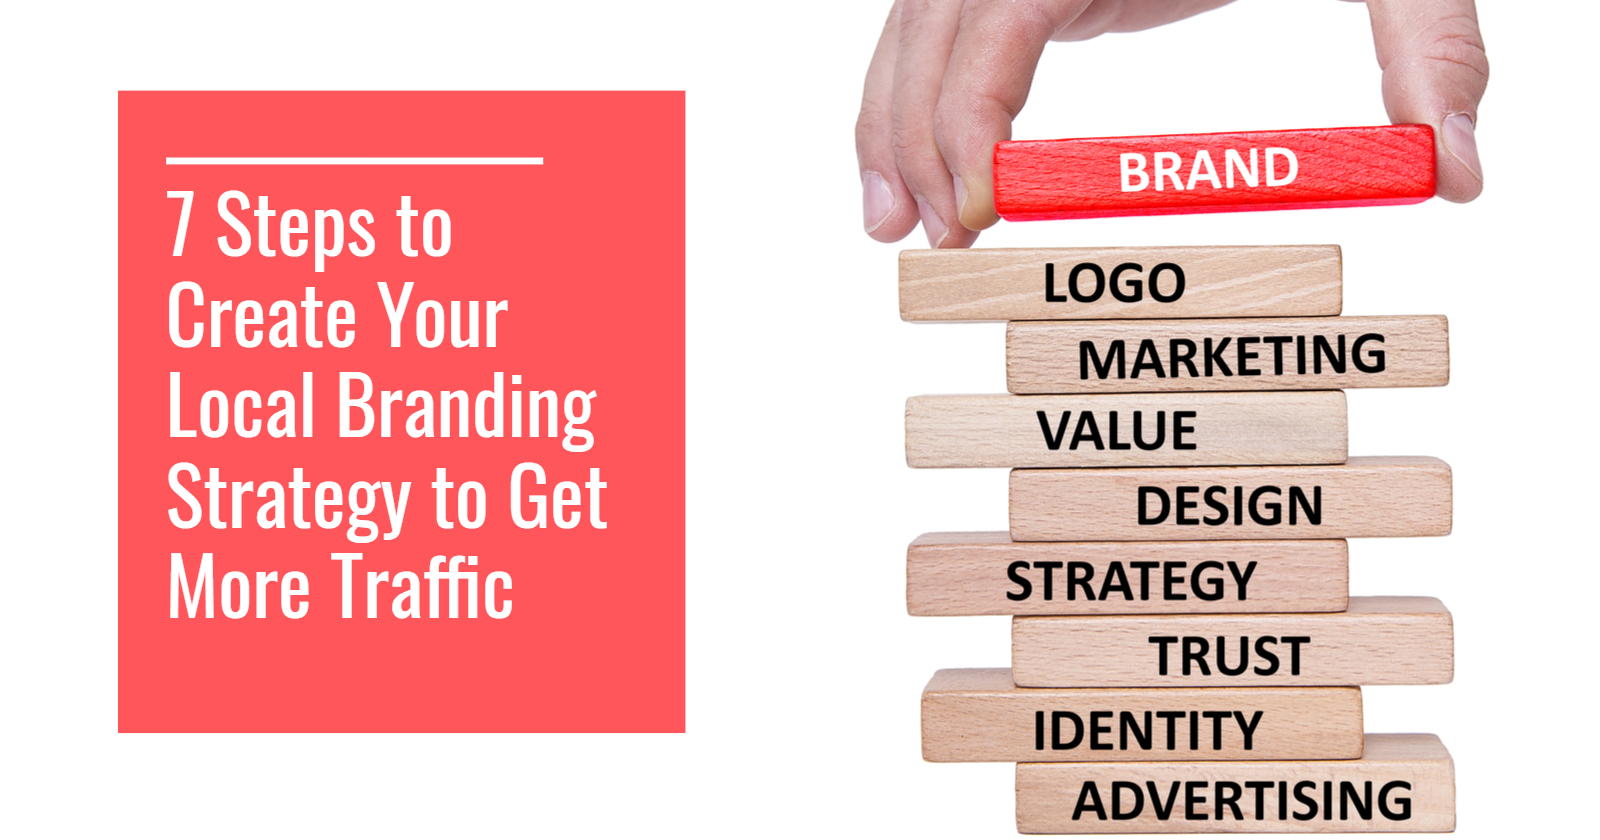 7 Steps to Create Your Local Branding Strategy to Get More Traffic Jason Hennessey